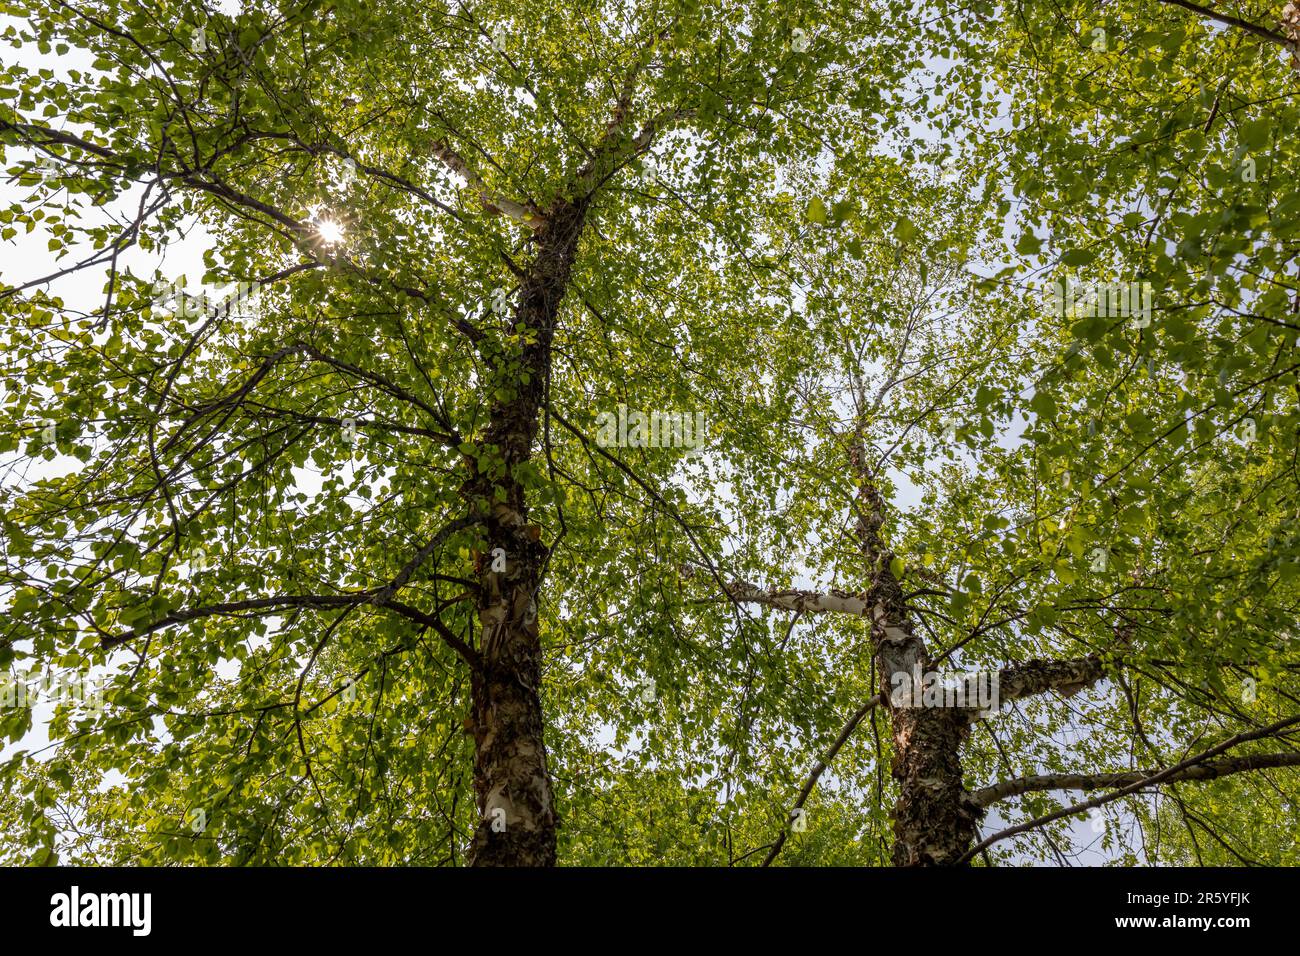 Texture background canopy view underneath the leaves of a river birch (betula nigra) tree Stock Photo